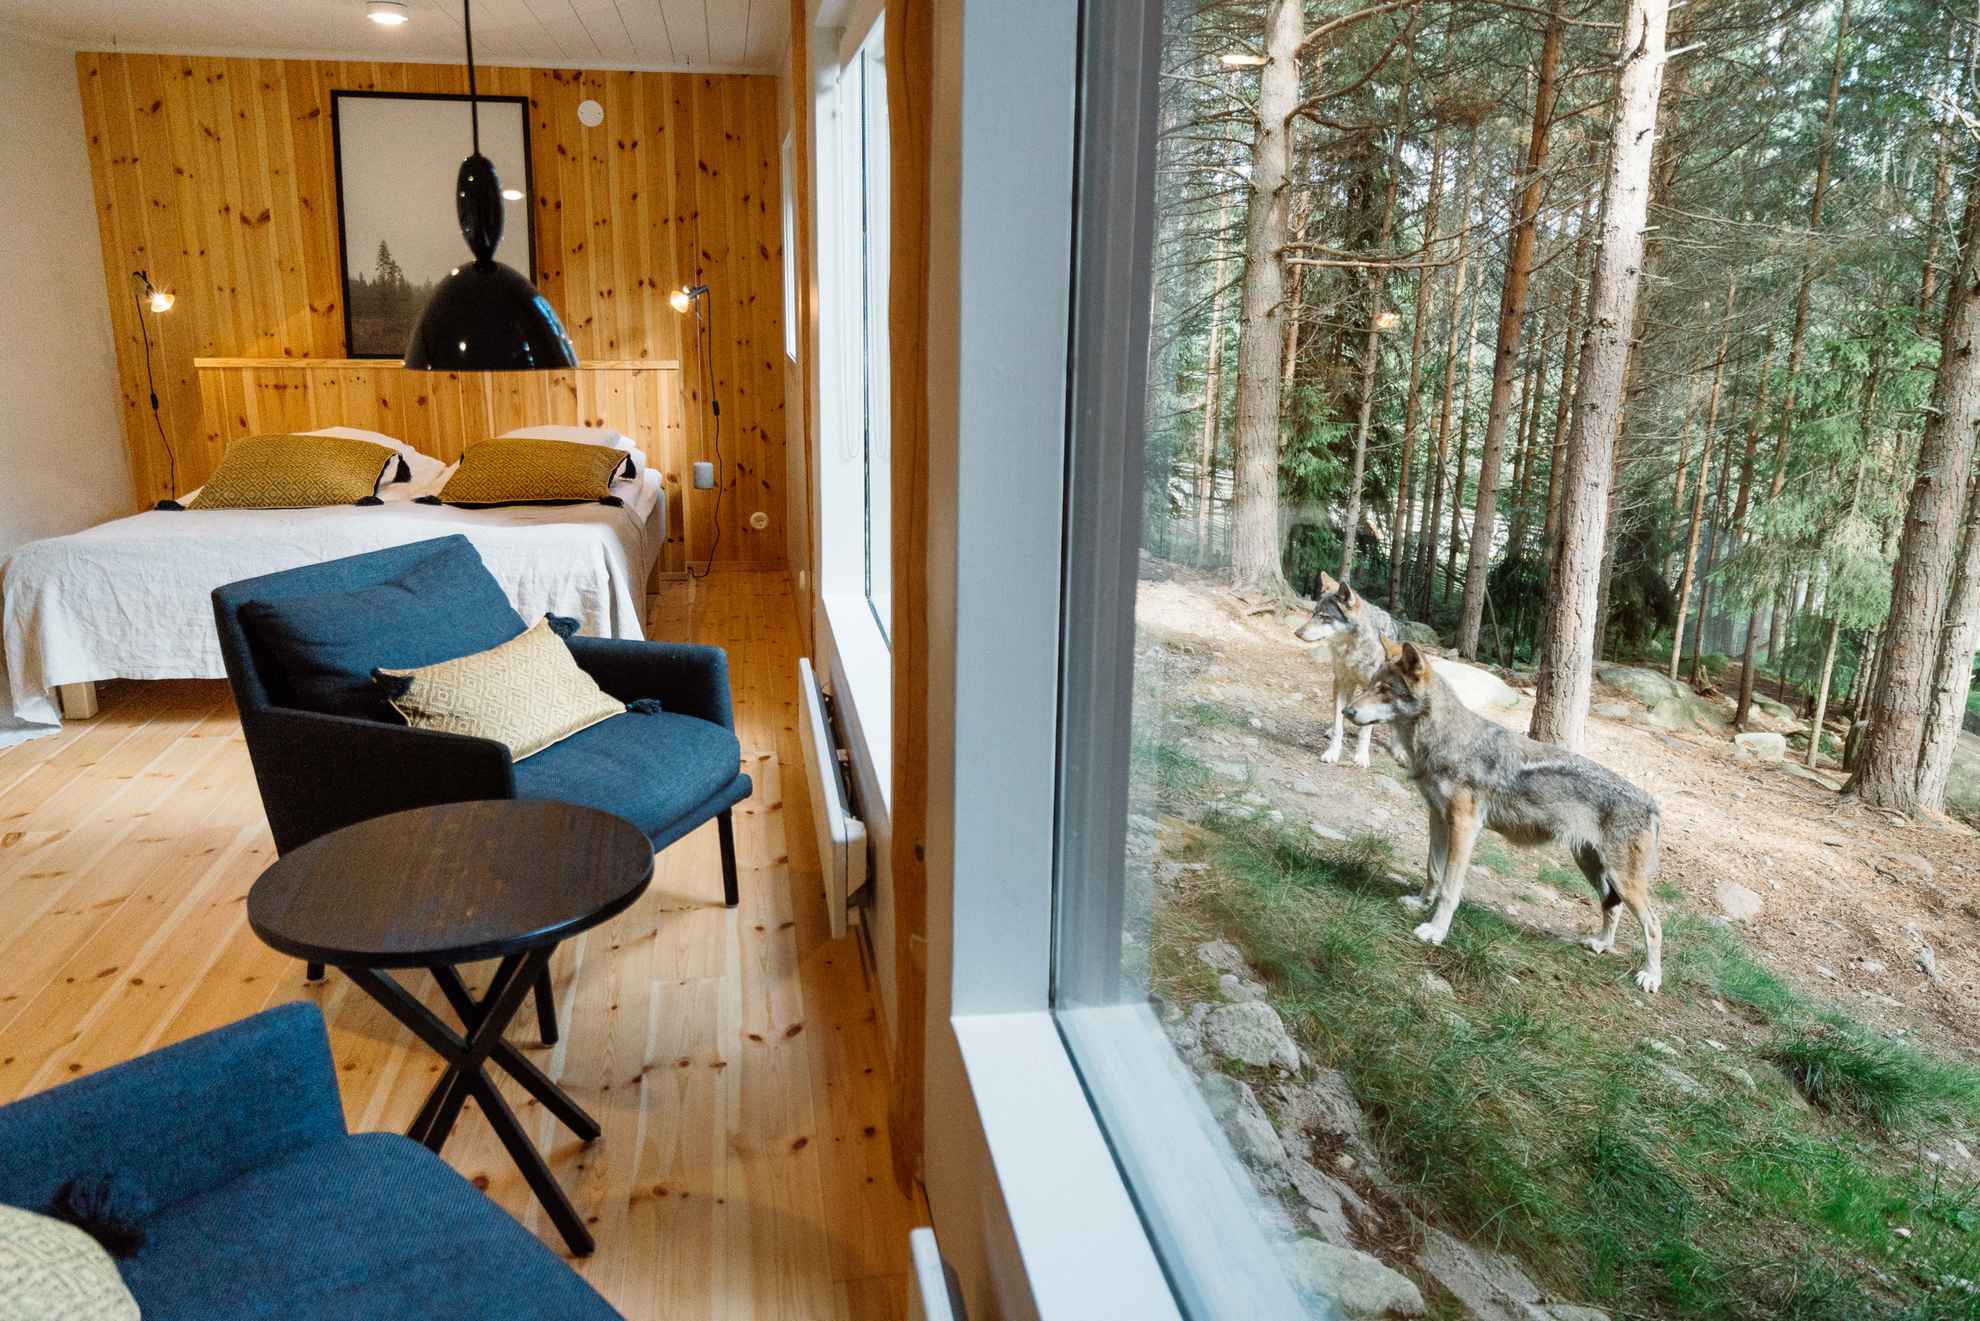 A hotel room with panoramic windows facing the wolf enclosure. Wolves are standing outside the window.